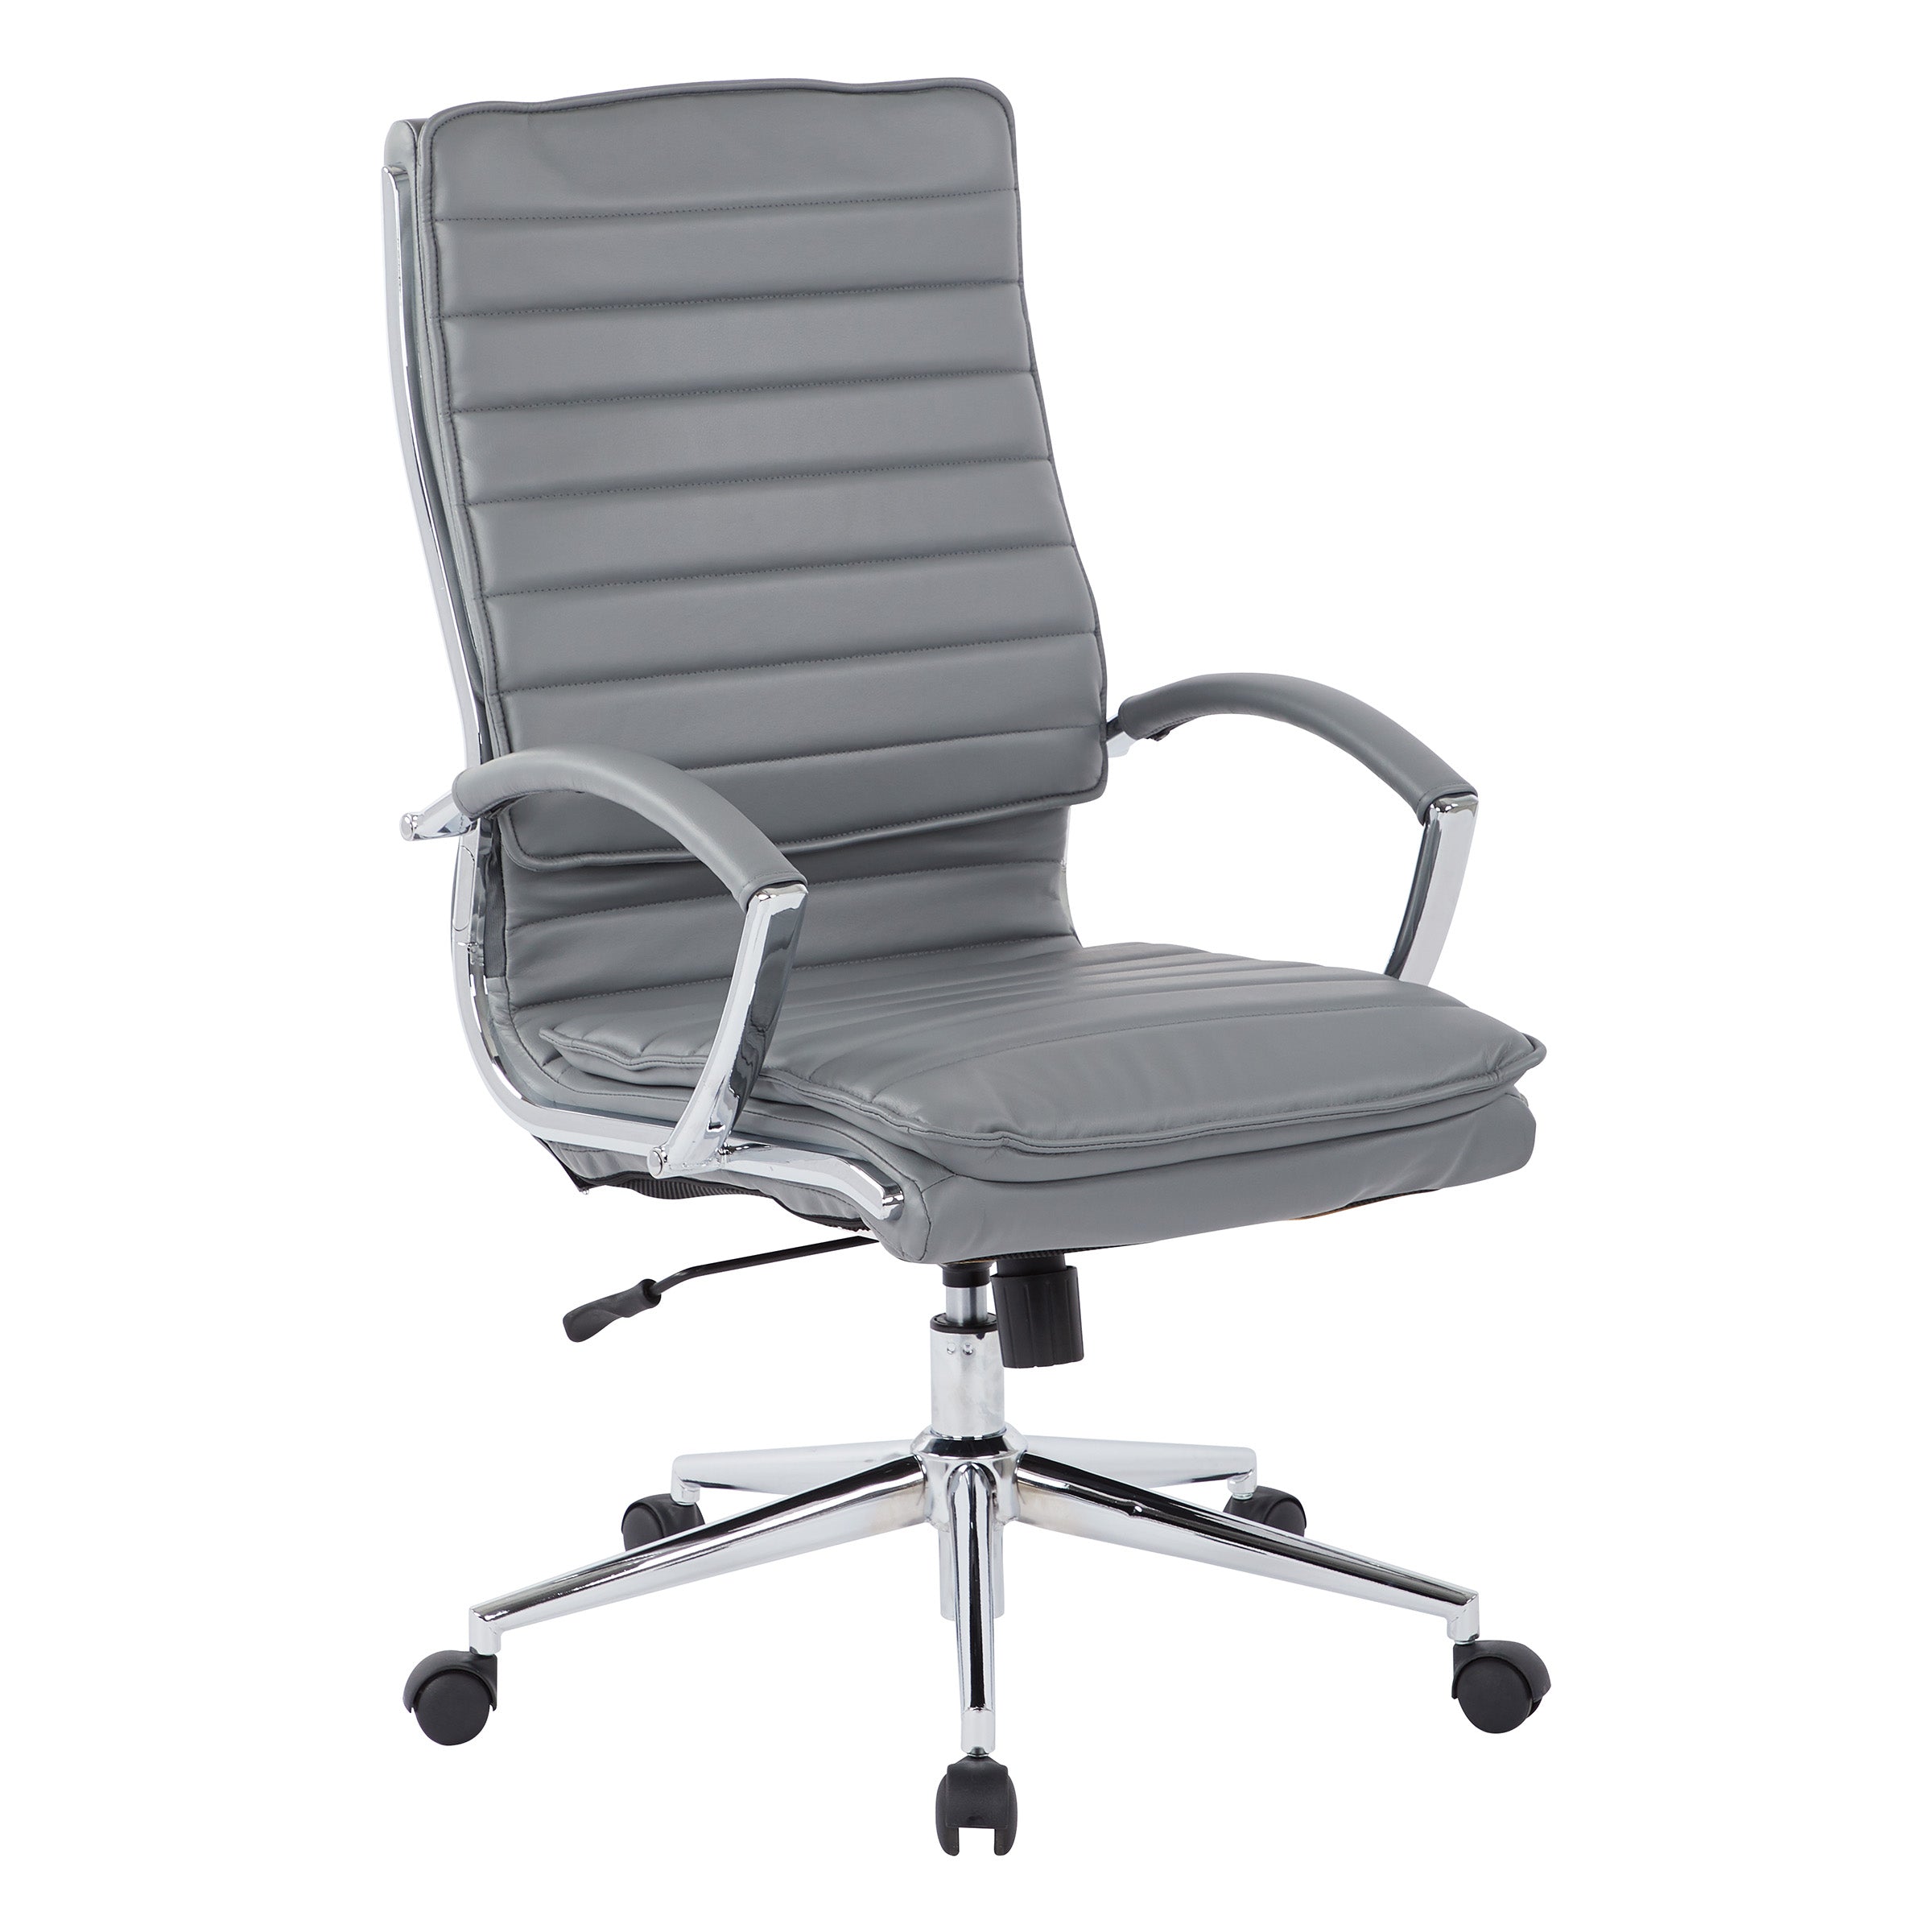 SPX23590C - High-Back Faux Leather Chair  by Office Star